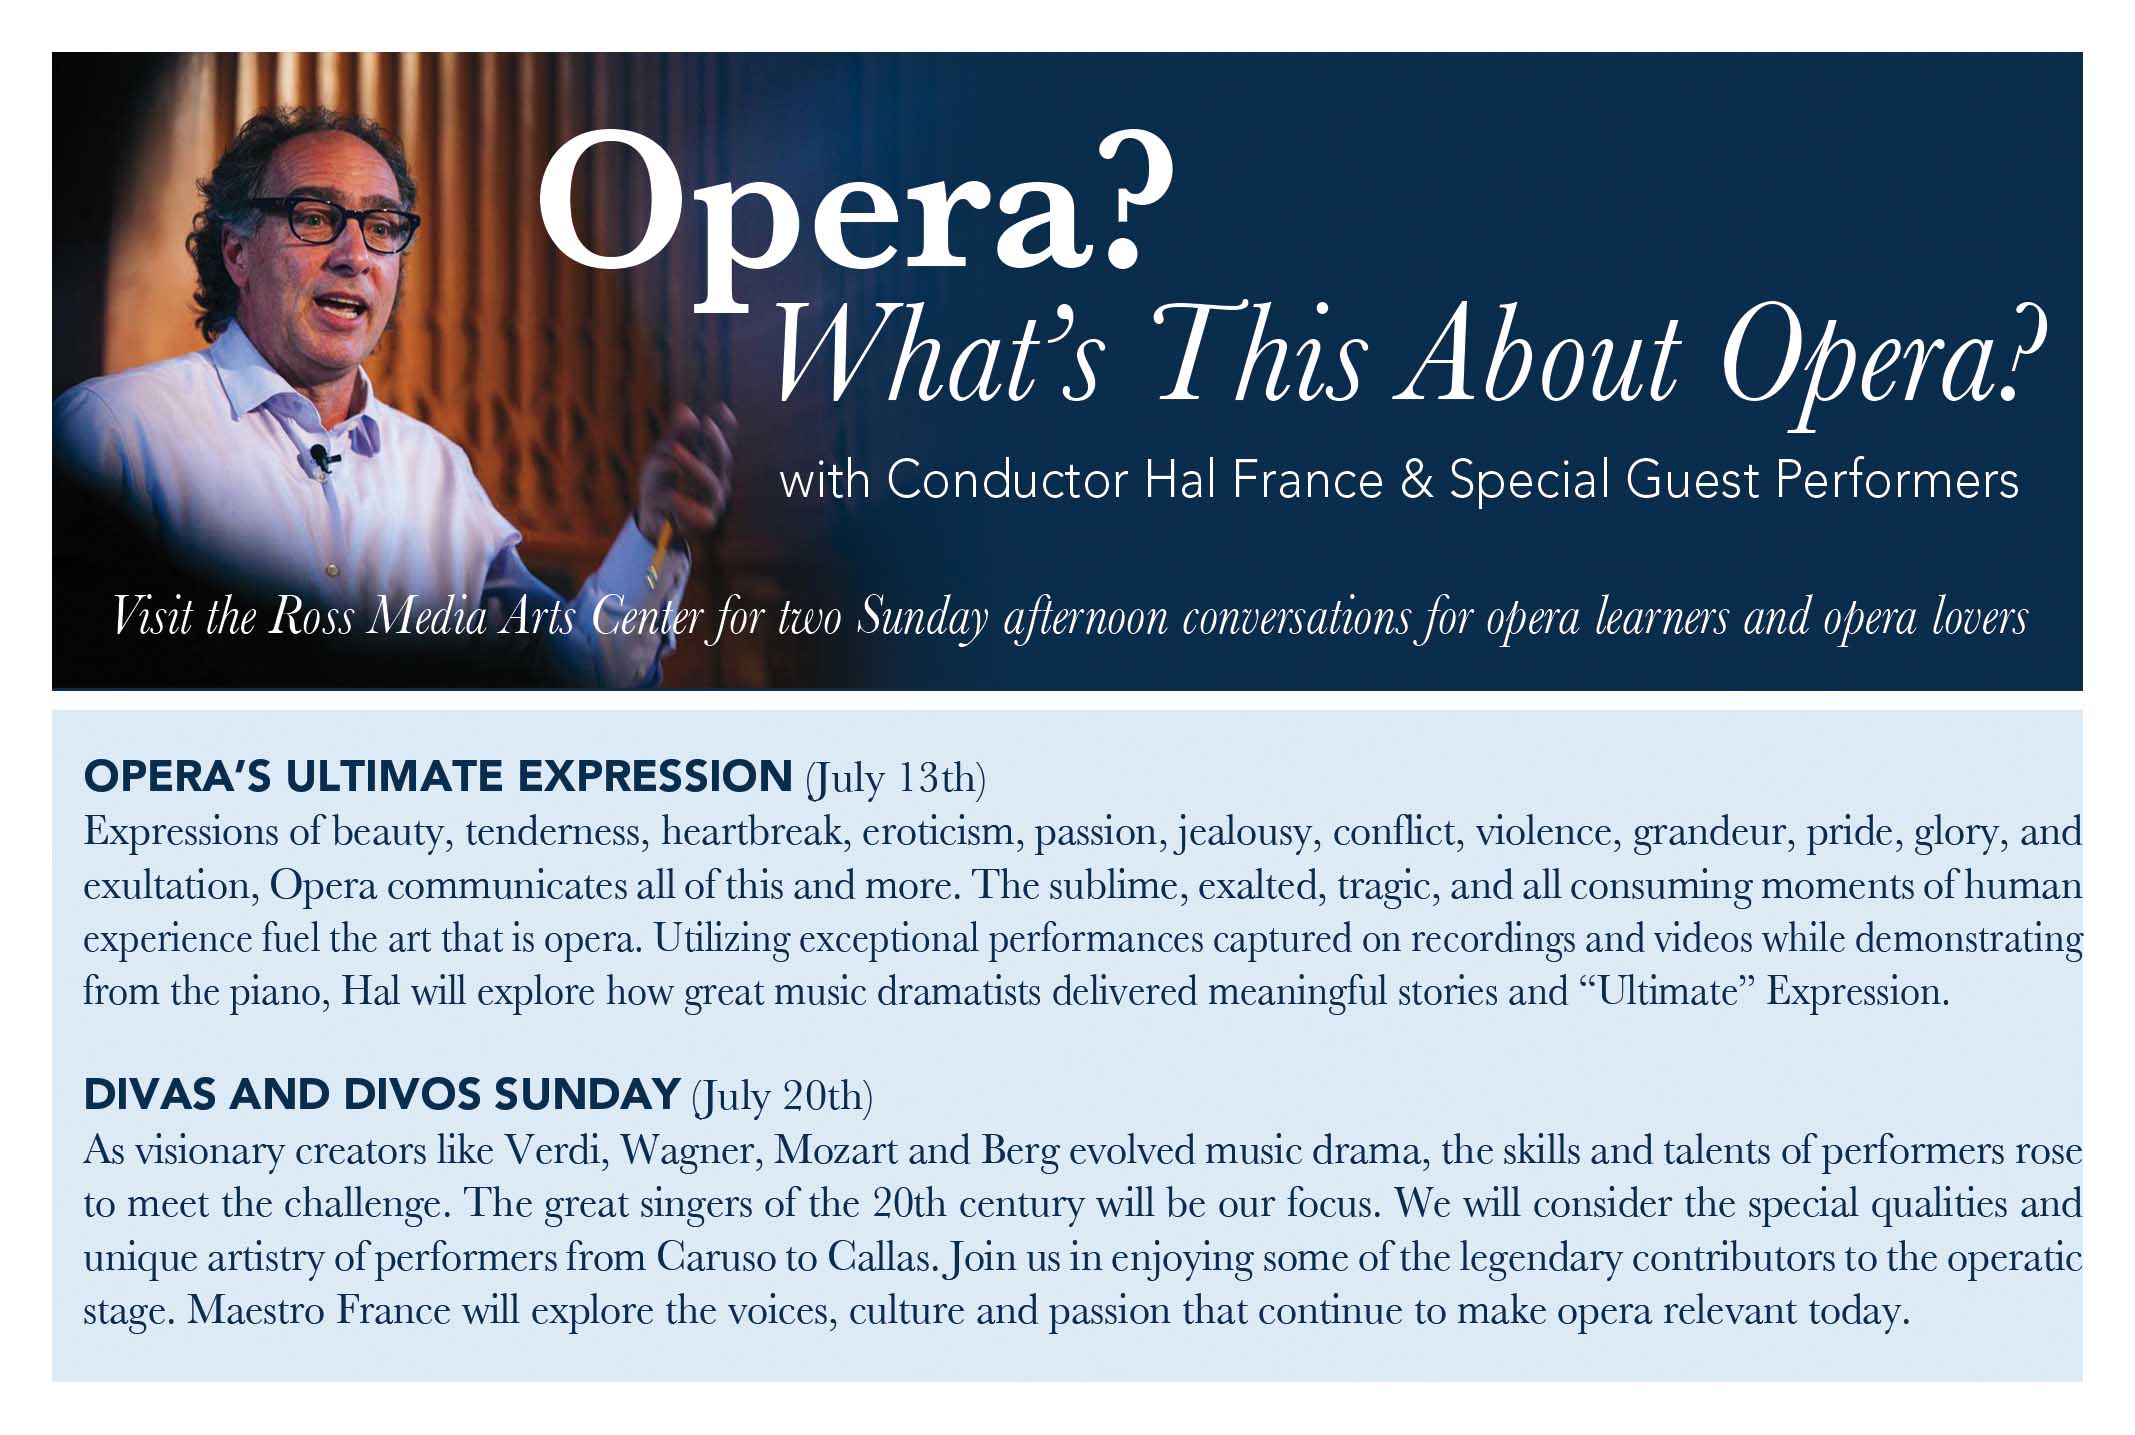 Join conductor Hal France and special guest performers for two Sunday afternoon conversations for opera learners and opera lovers. Titled OPERA? WHAT’S THIS ABOUT OPERA?, these talks are free and open to the public, and held in the Van Brunt Visitor’s Cen